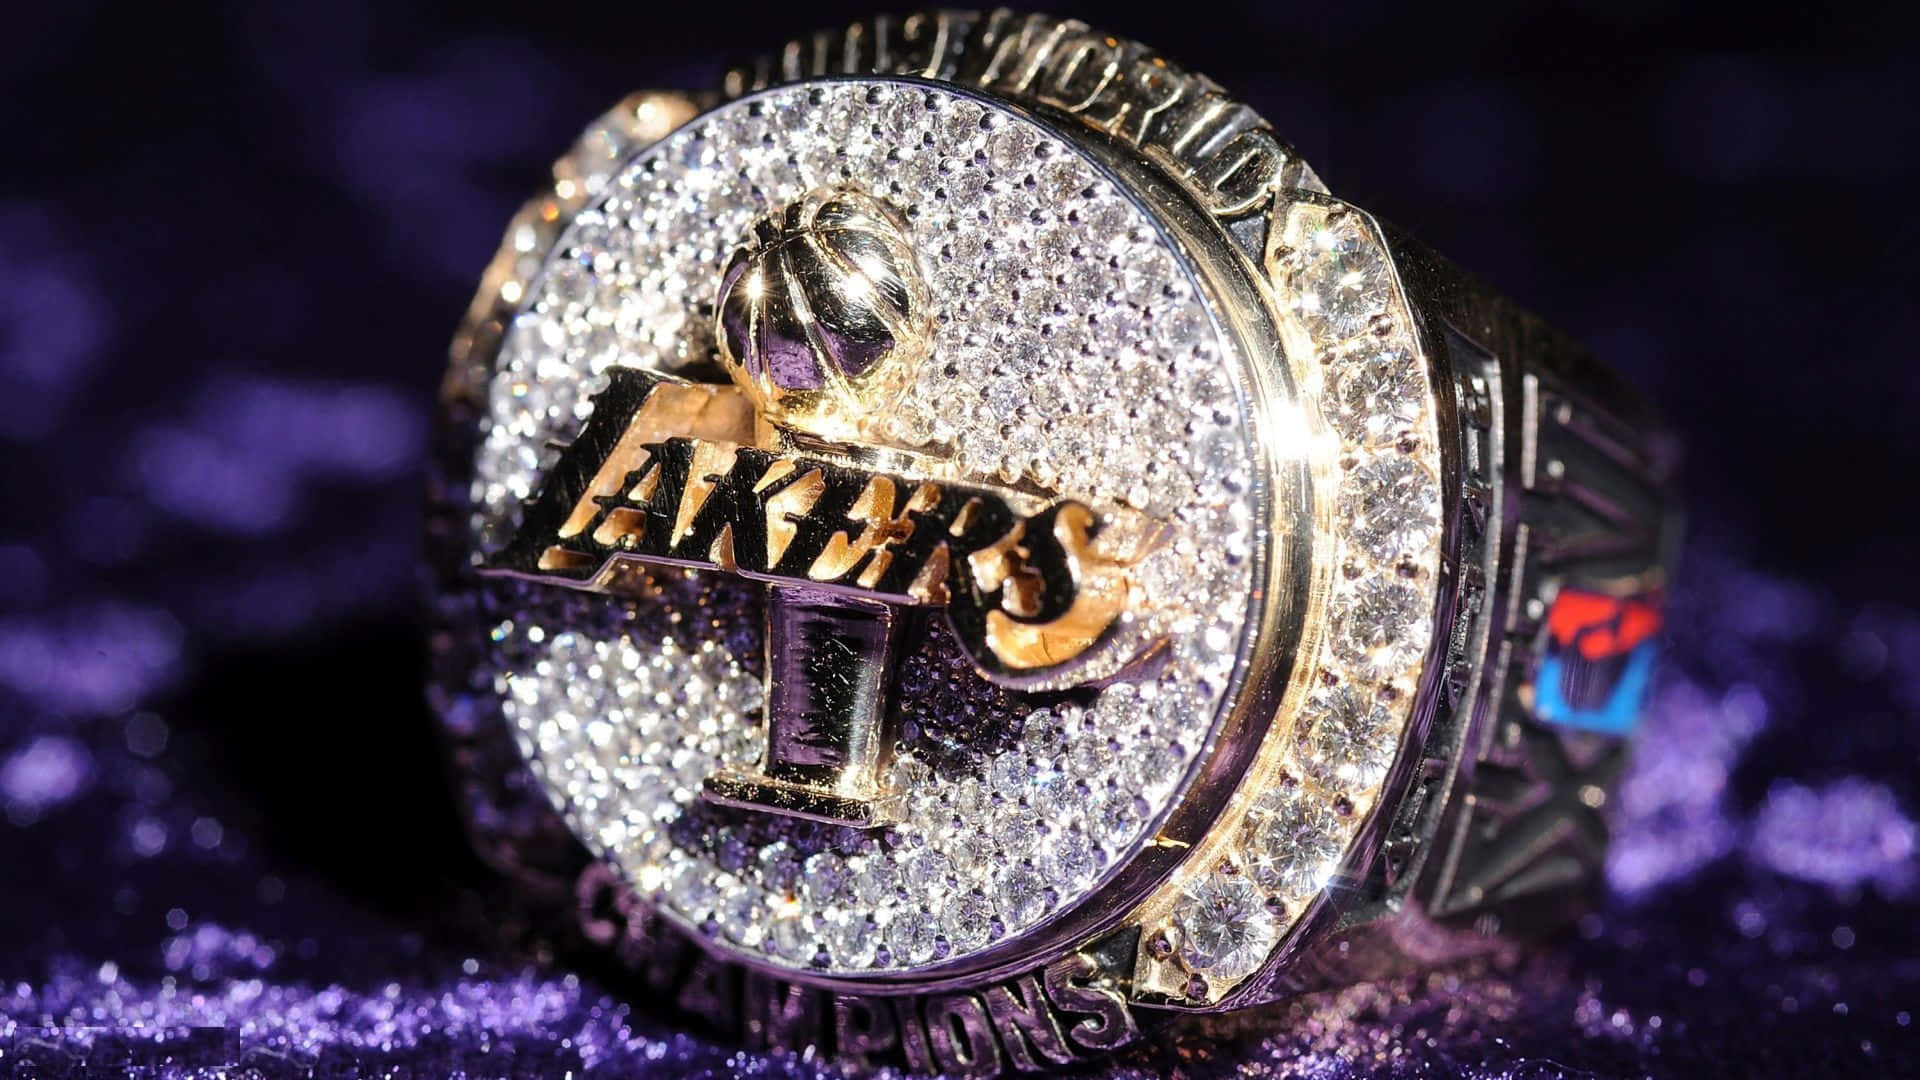 Show your team and city some love – Lakers Nation!